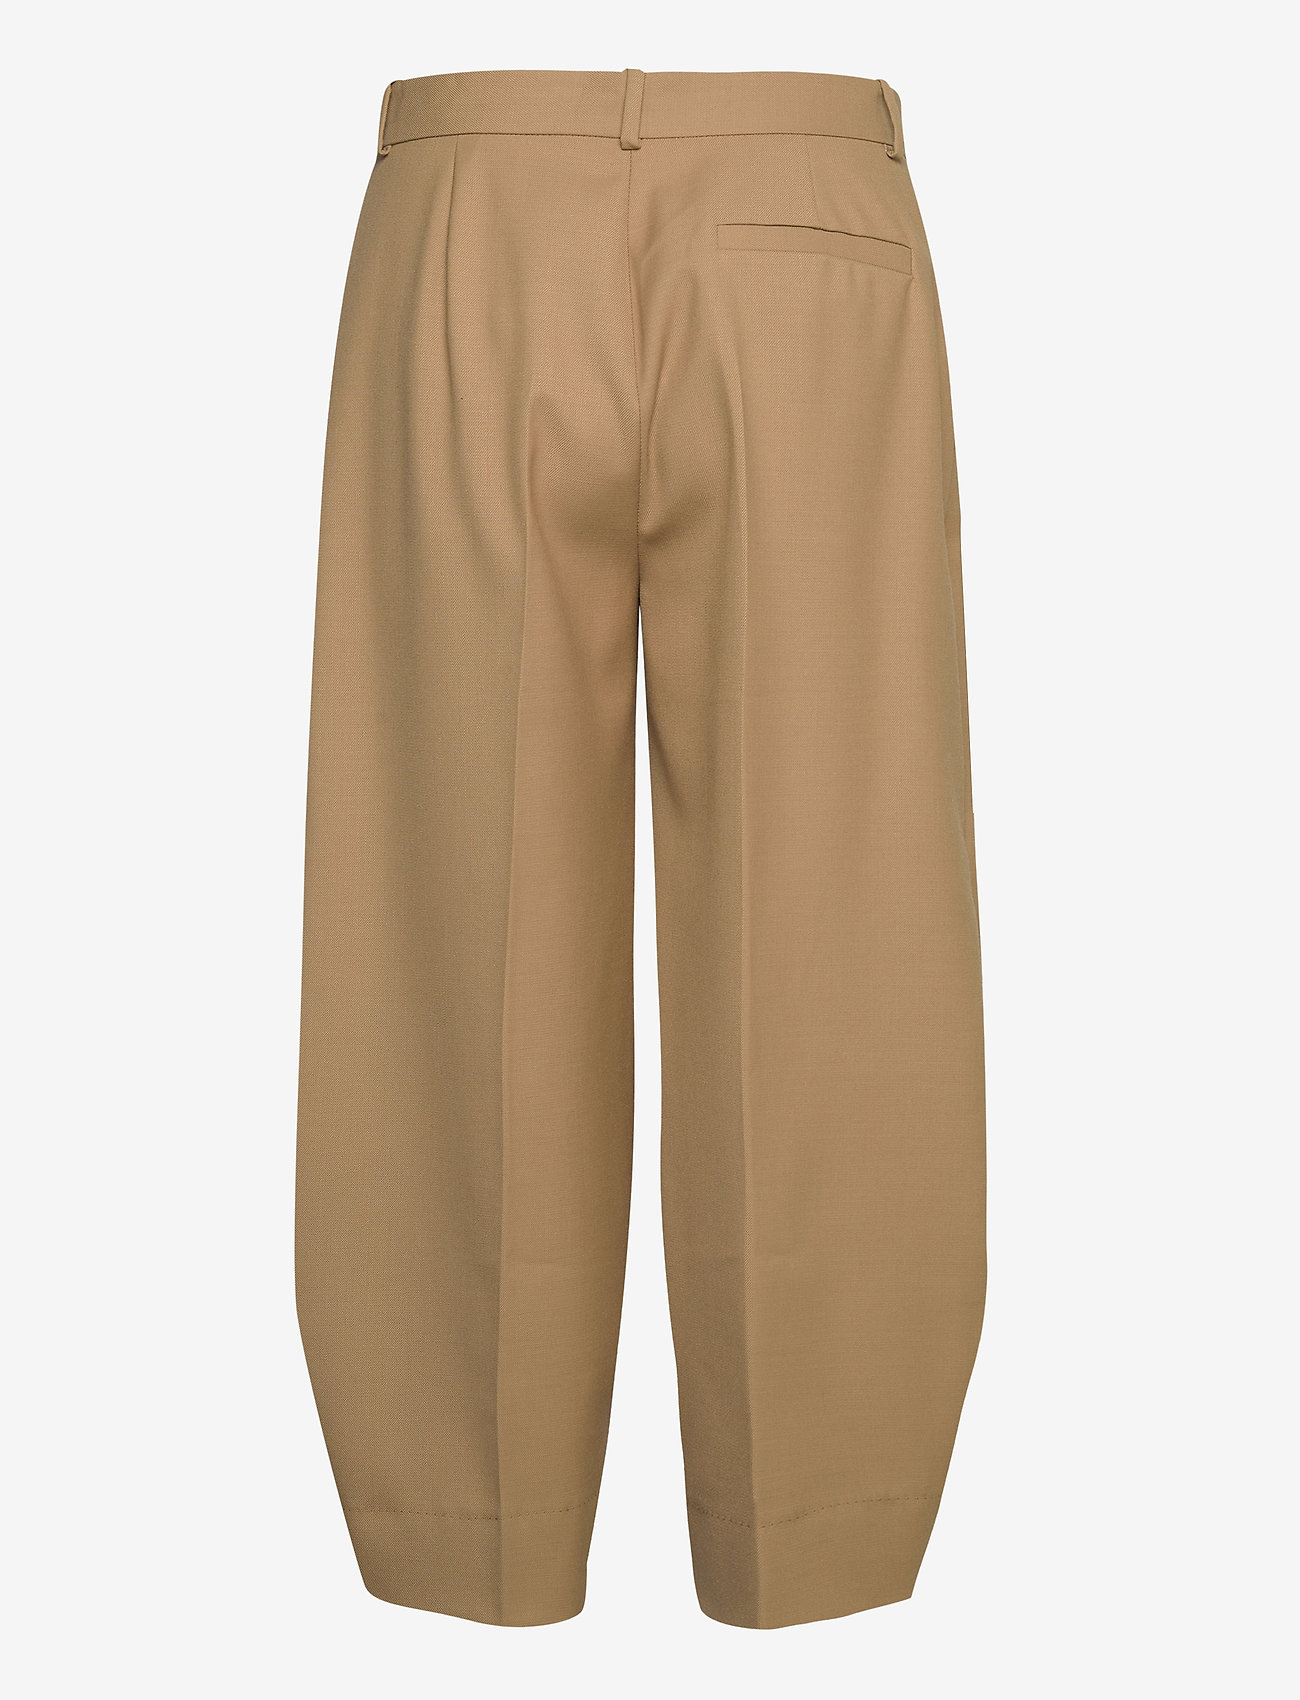 RODEBJER - RODEBJER AIA - culottes - camel - 1